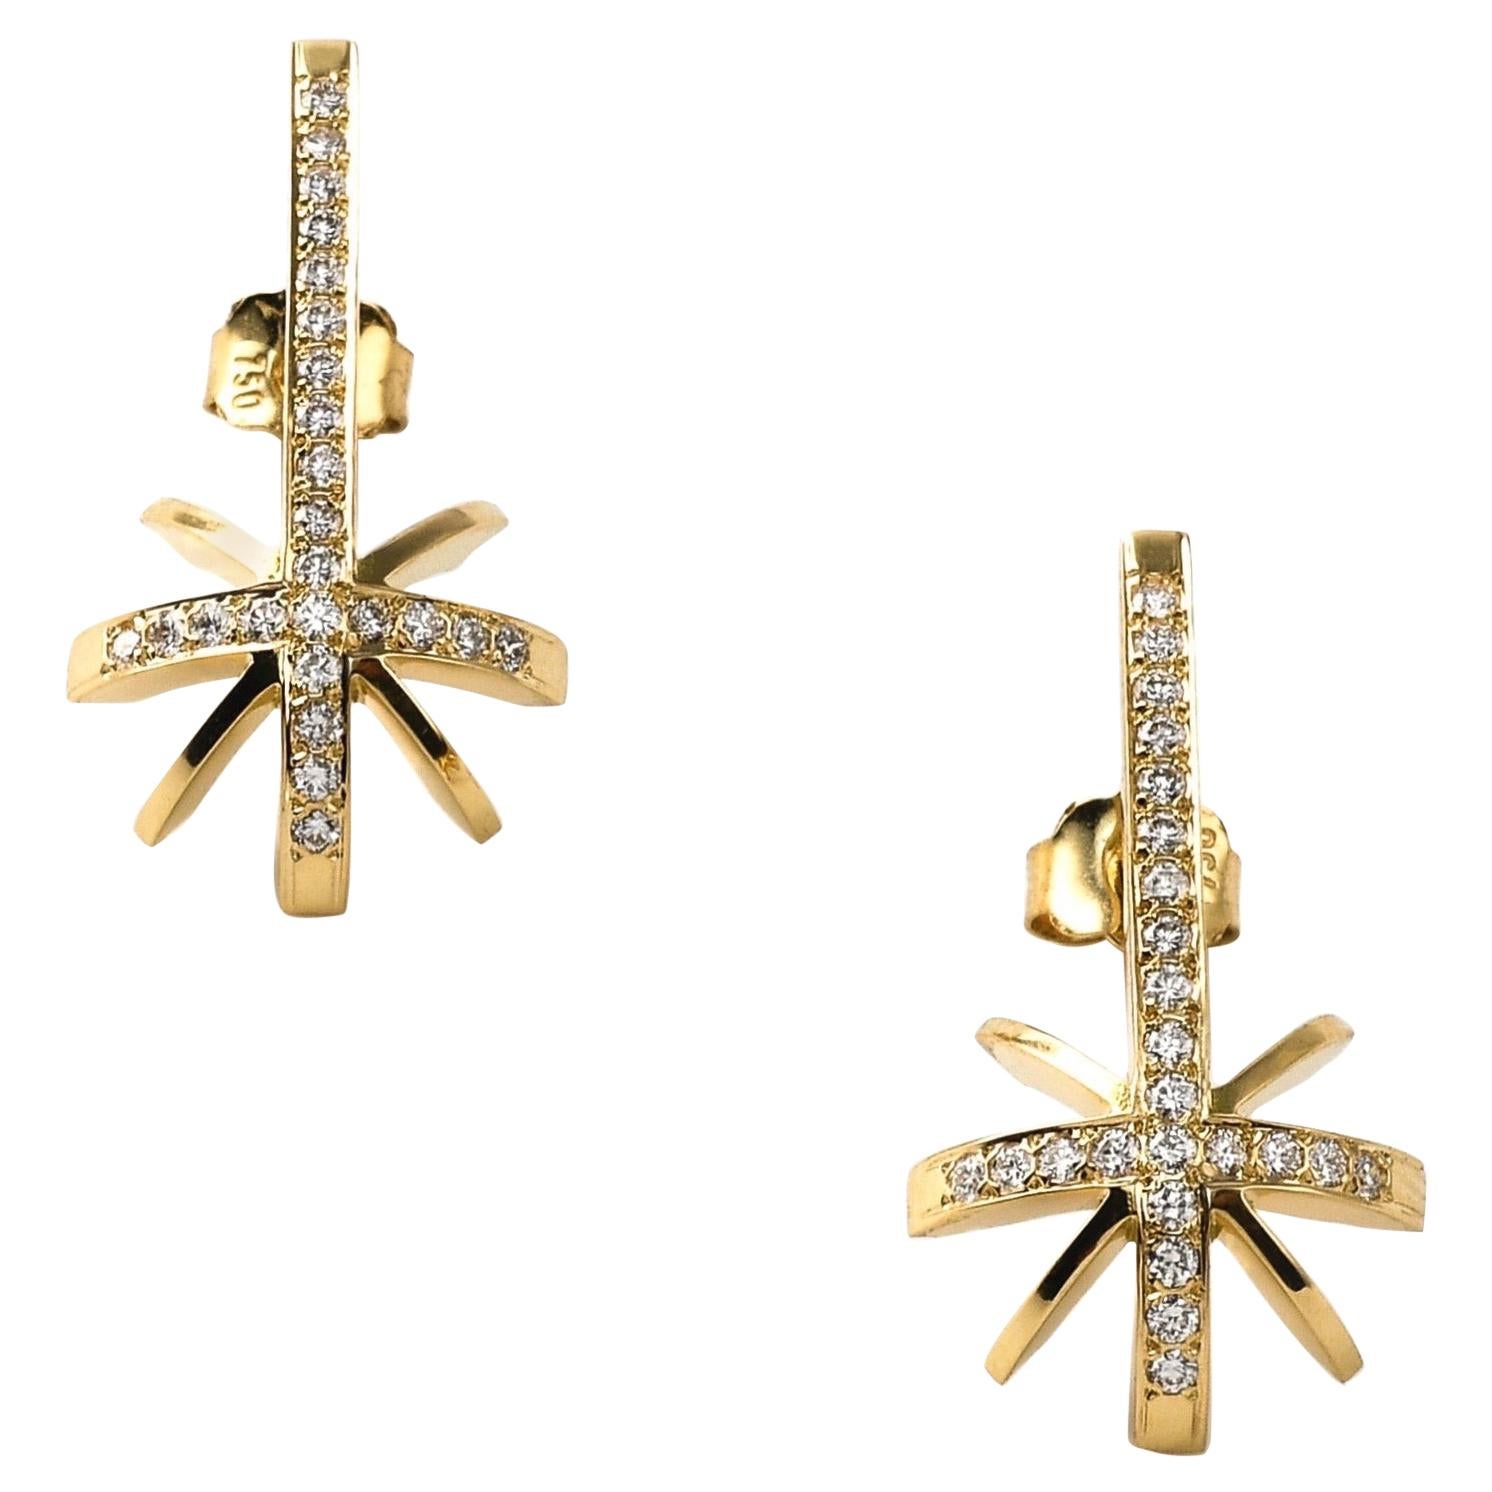 Contemporary Sculptural 18K Yellow Gold & White Diamond Shooting Star Earrings For Sale